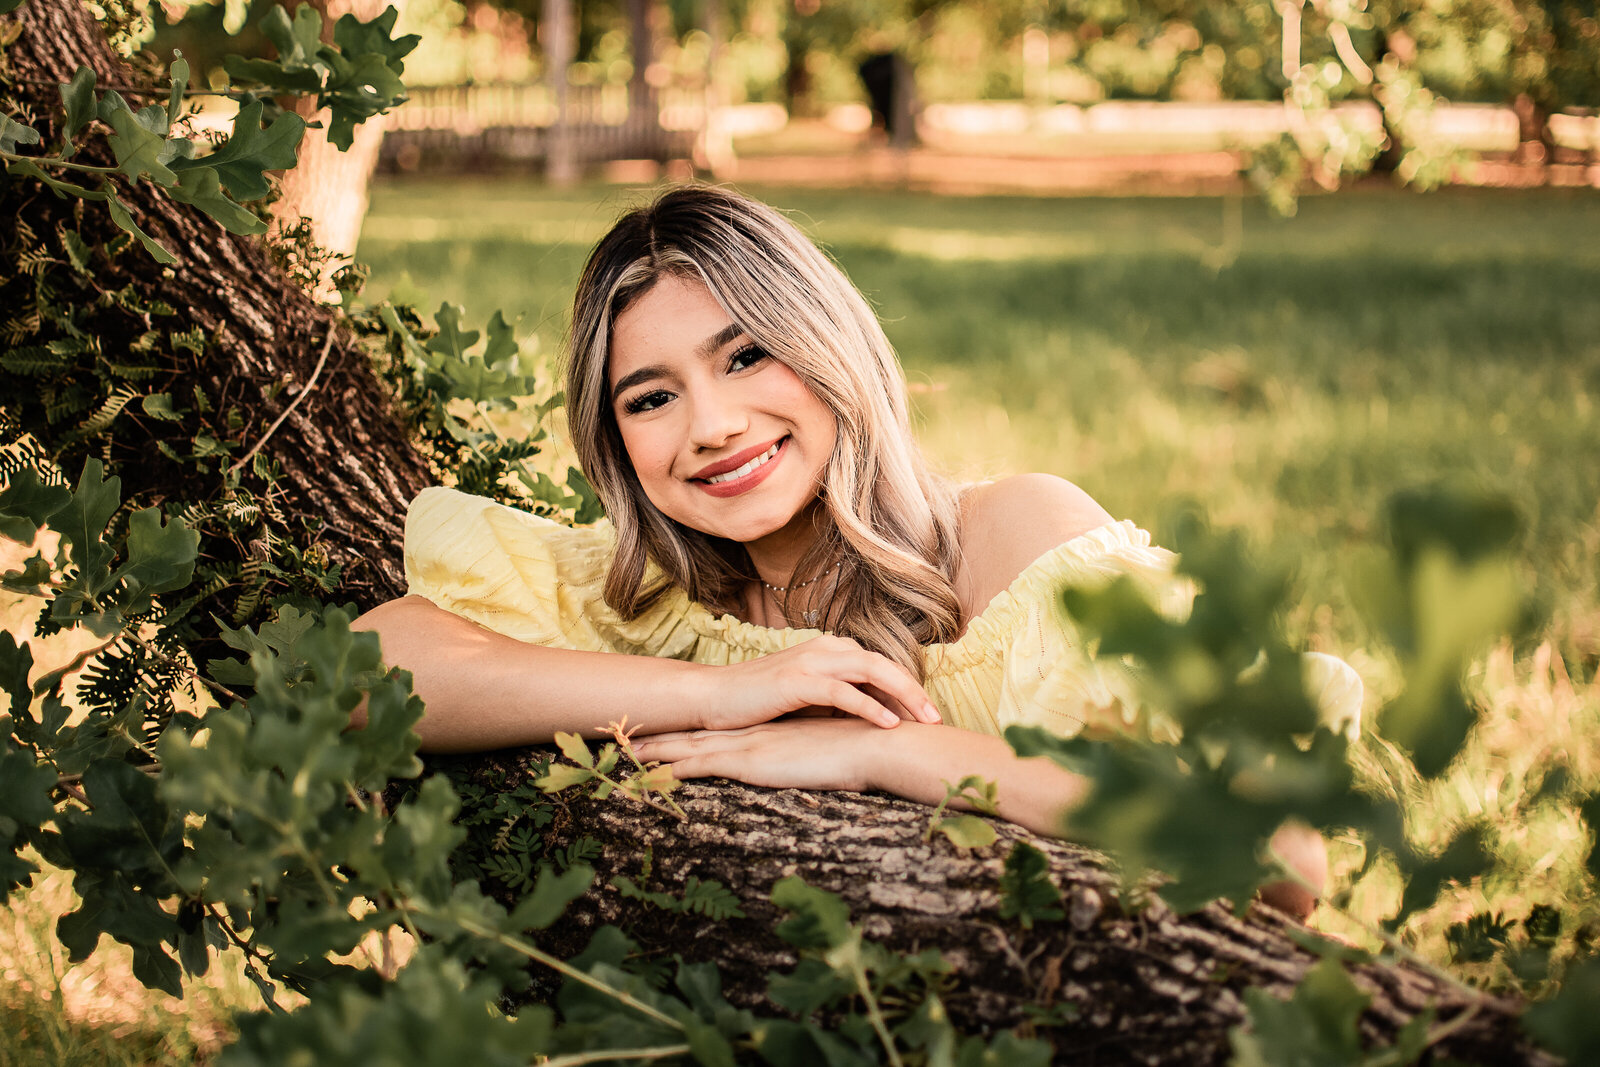 A Houston area senior leans on an oak tree covered with vines and smiles at the camera.